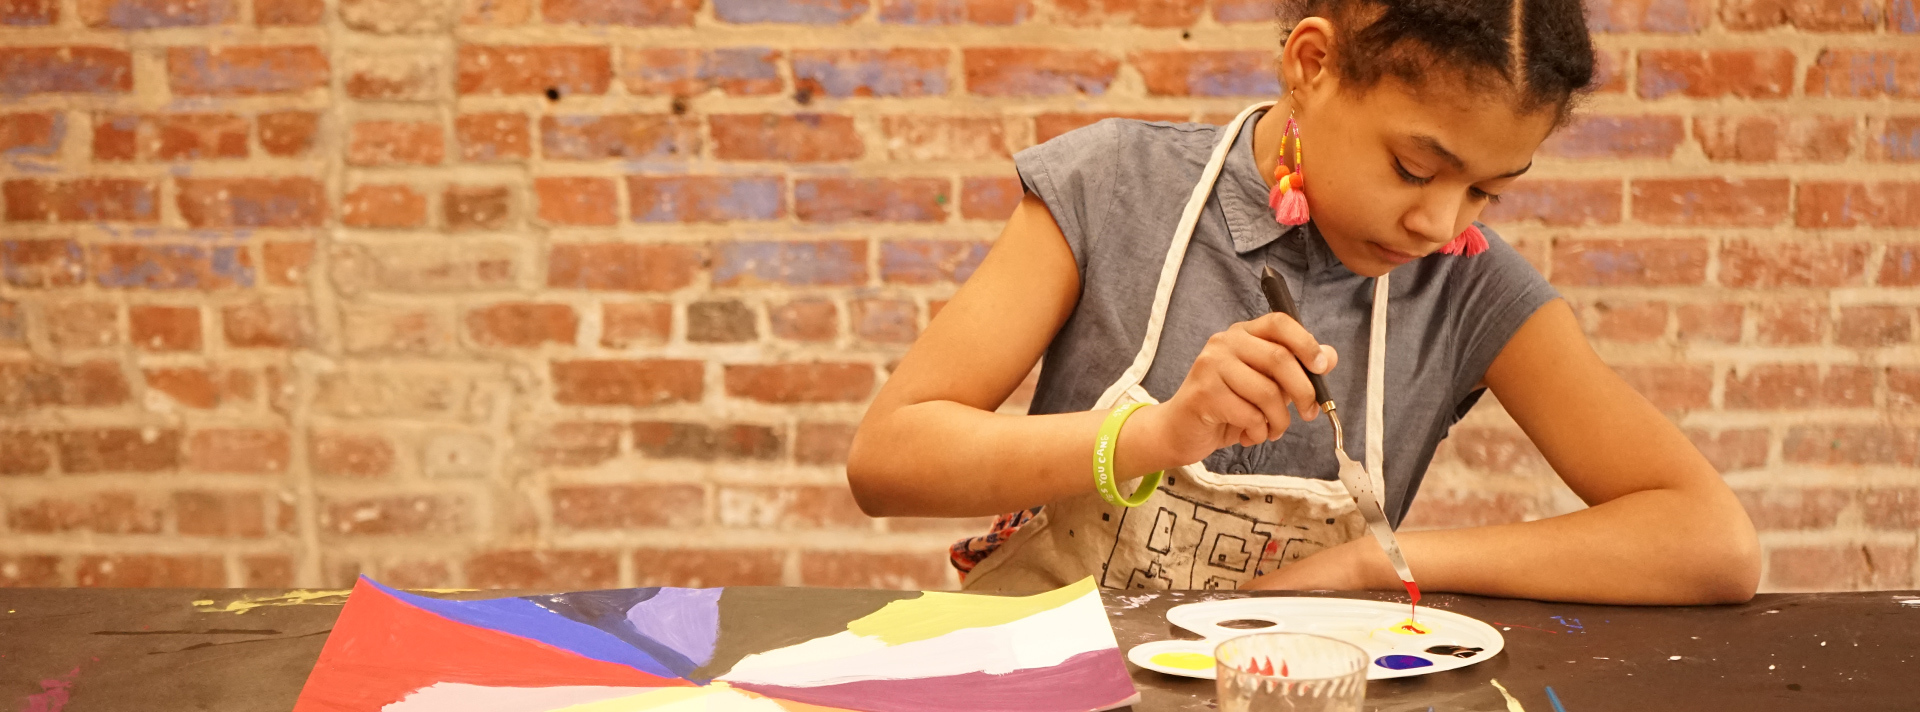 Youth engagement Header - Young artist at work, seated in front of a brick wall wearing an apron and mixing paints in a palette.